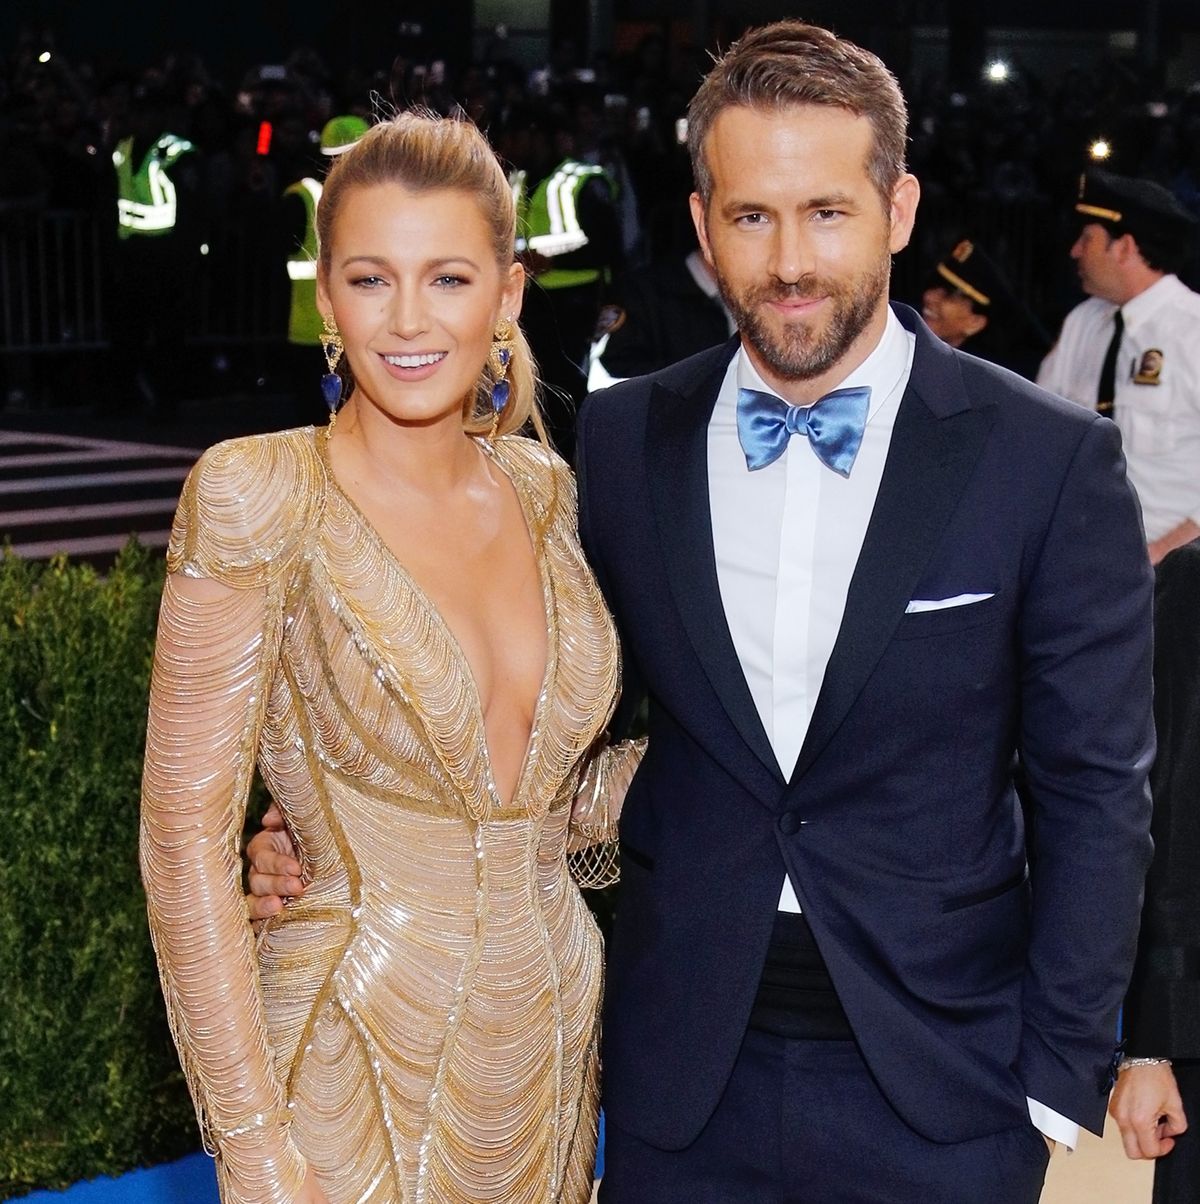 https://hips.hearstapps.com/hmg-prod/images/blake-lively-and-ryan-reynolds-attend-rei-kawakubo-comme-news-photo-1648449347.jpg?crop=1.00xw:0.860xh;0,0.0247xh&resize=1200:*